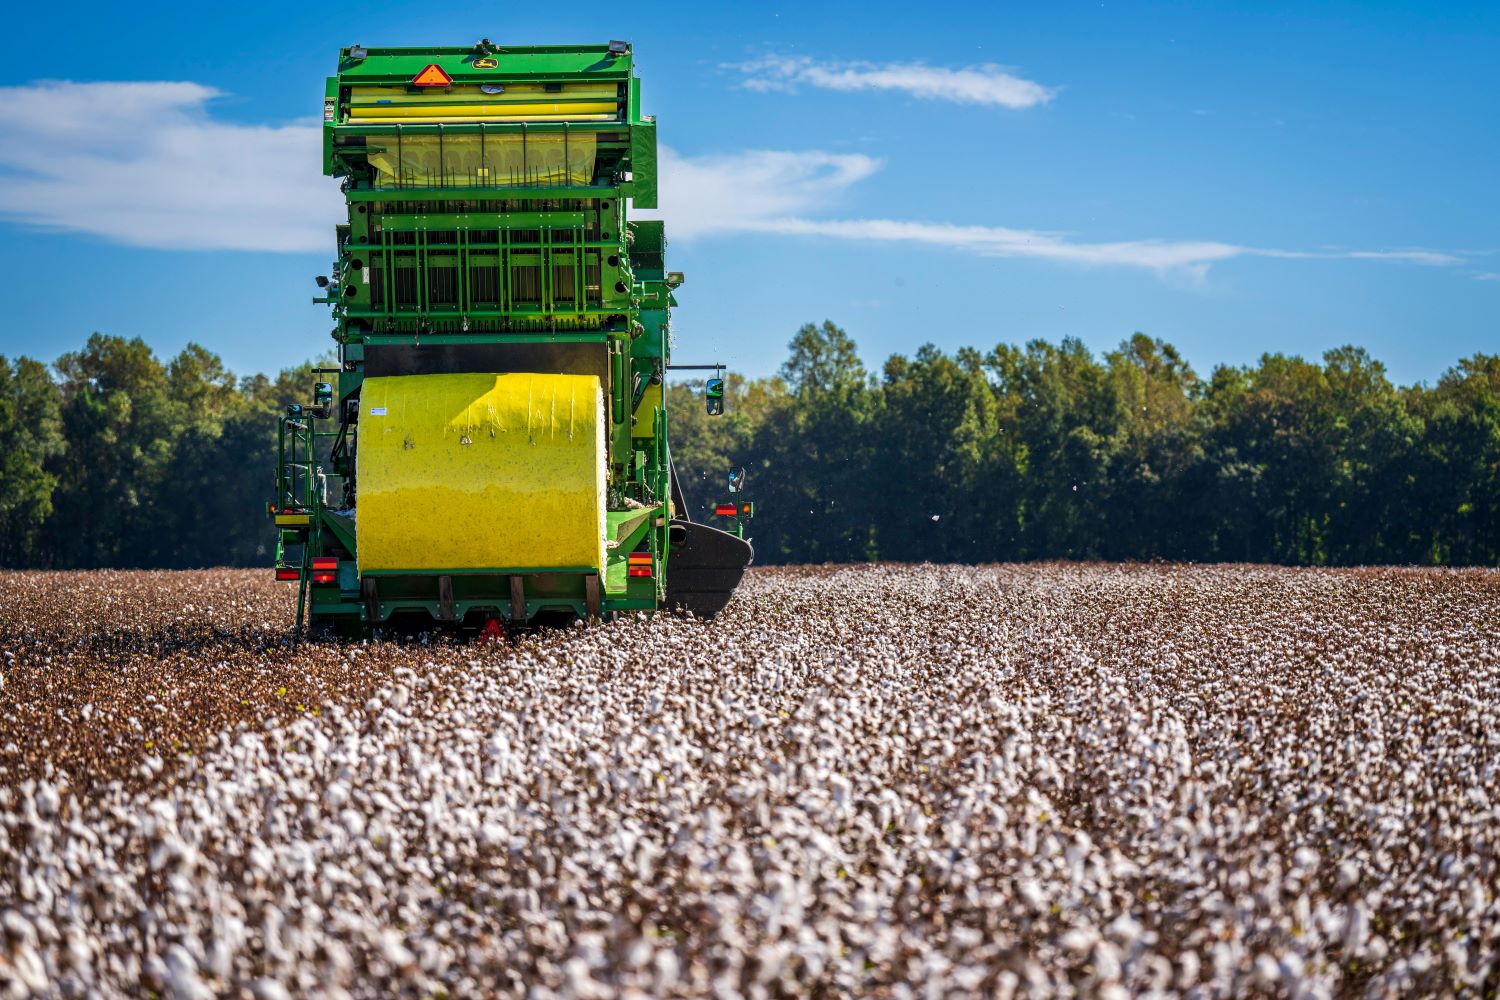 A Tractor Harvesting Cotton